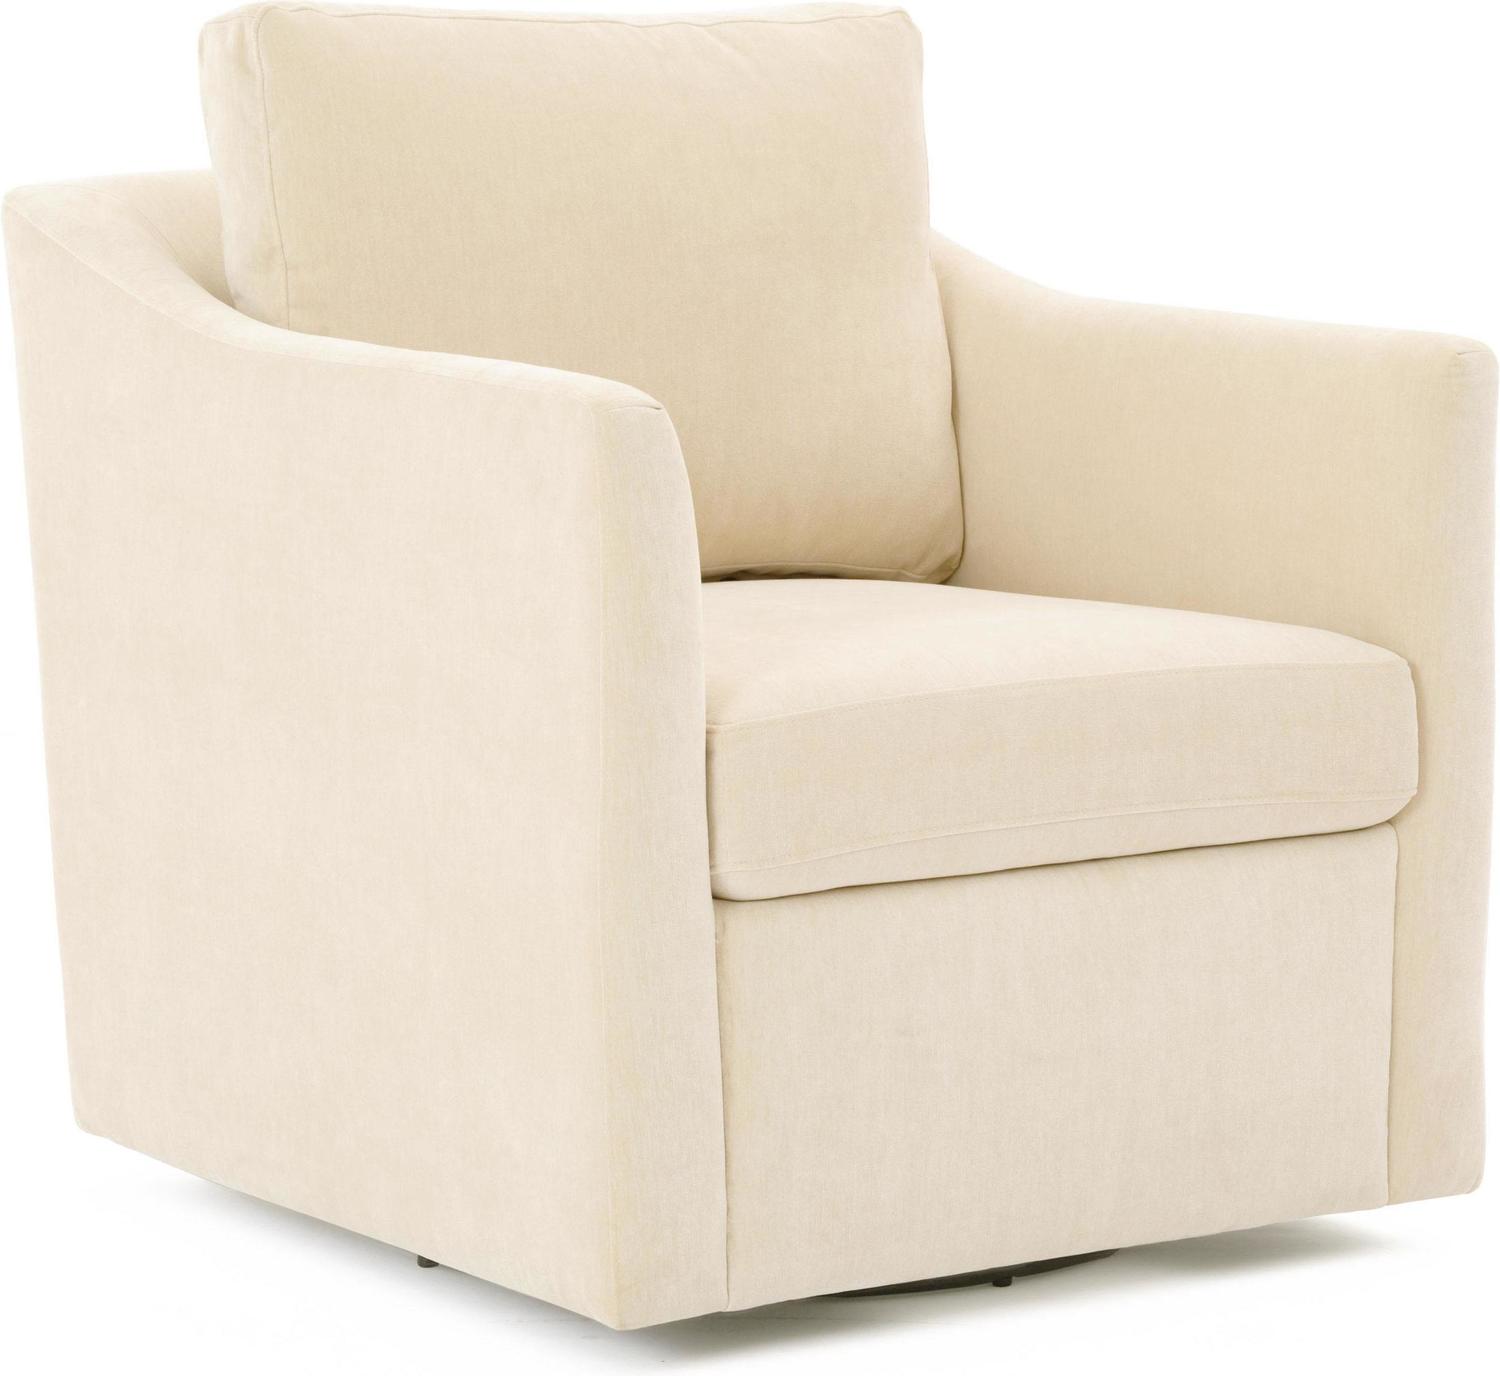 lounge chair with ottoman leather Contemporary Design Furniture Accent Chairs Beige